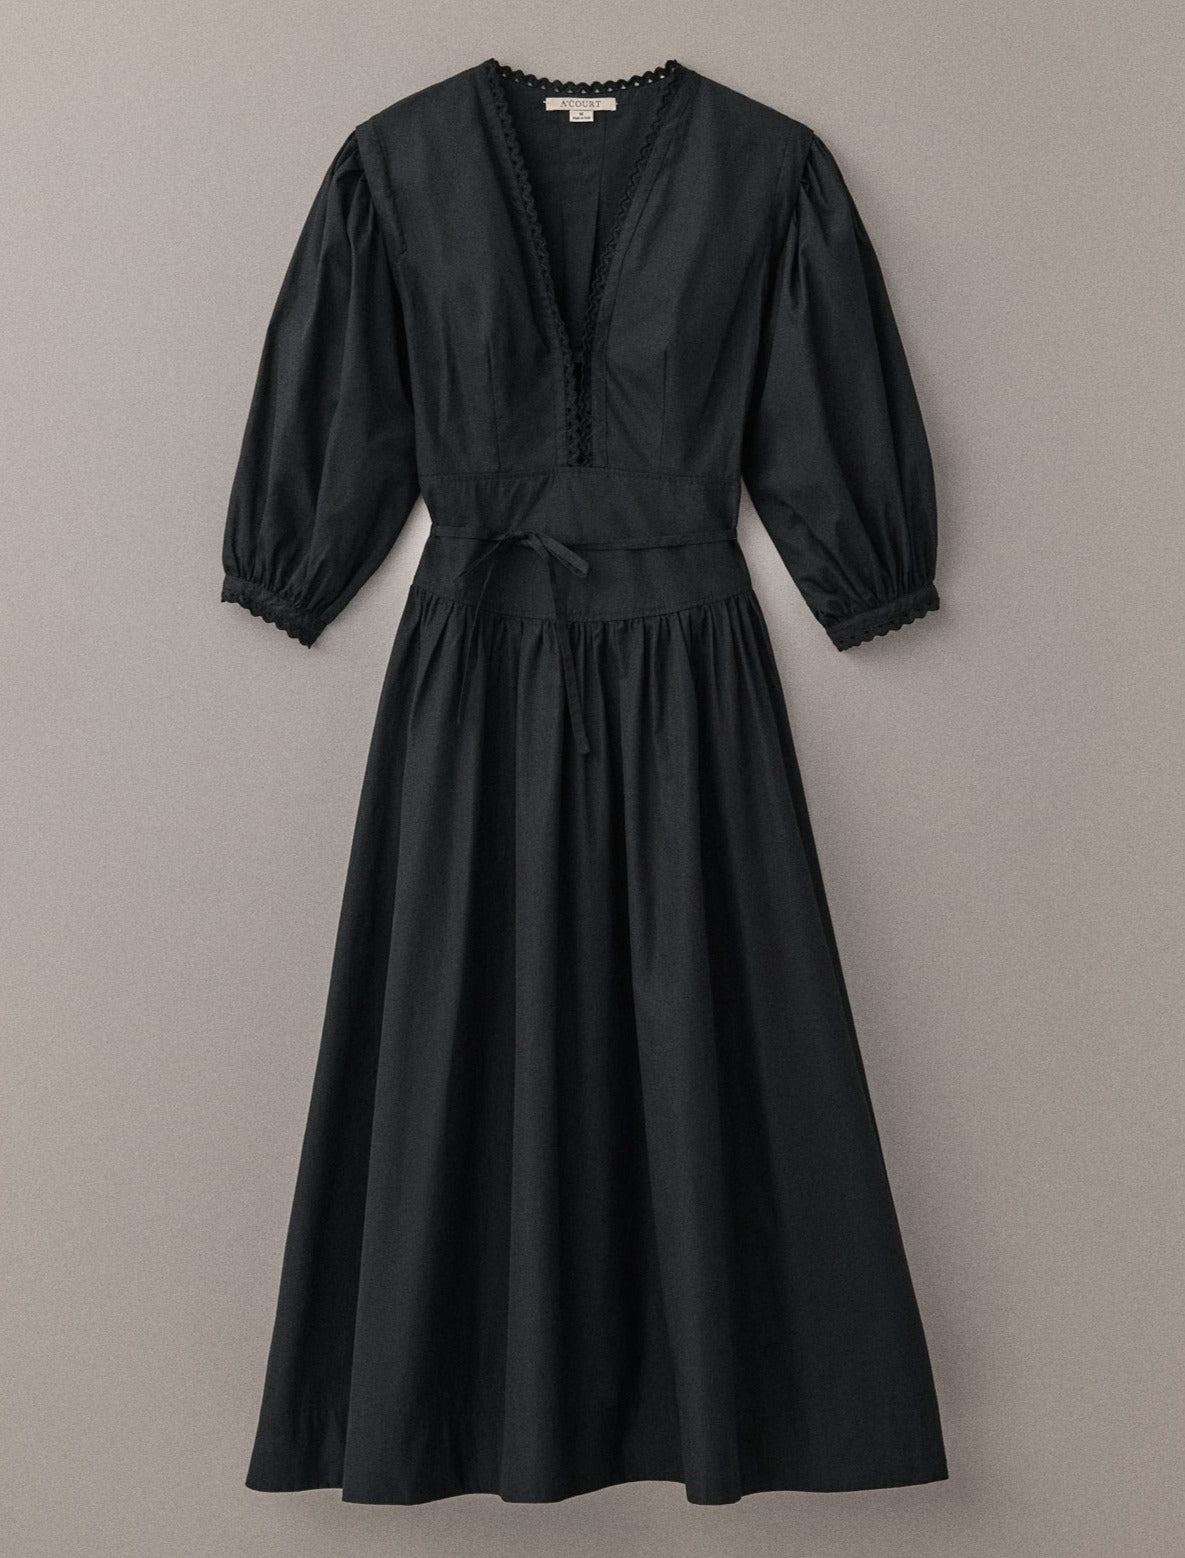 A black cotton long-sleeve maxi dress with puff sleeves and eyelet trim lies flat on a light brown field.